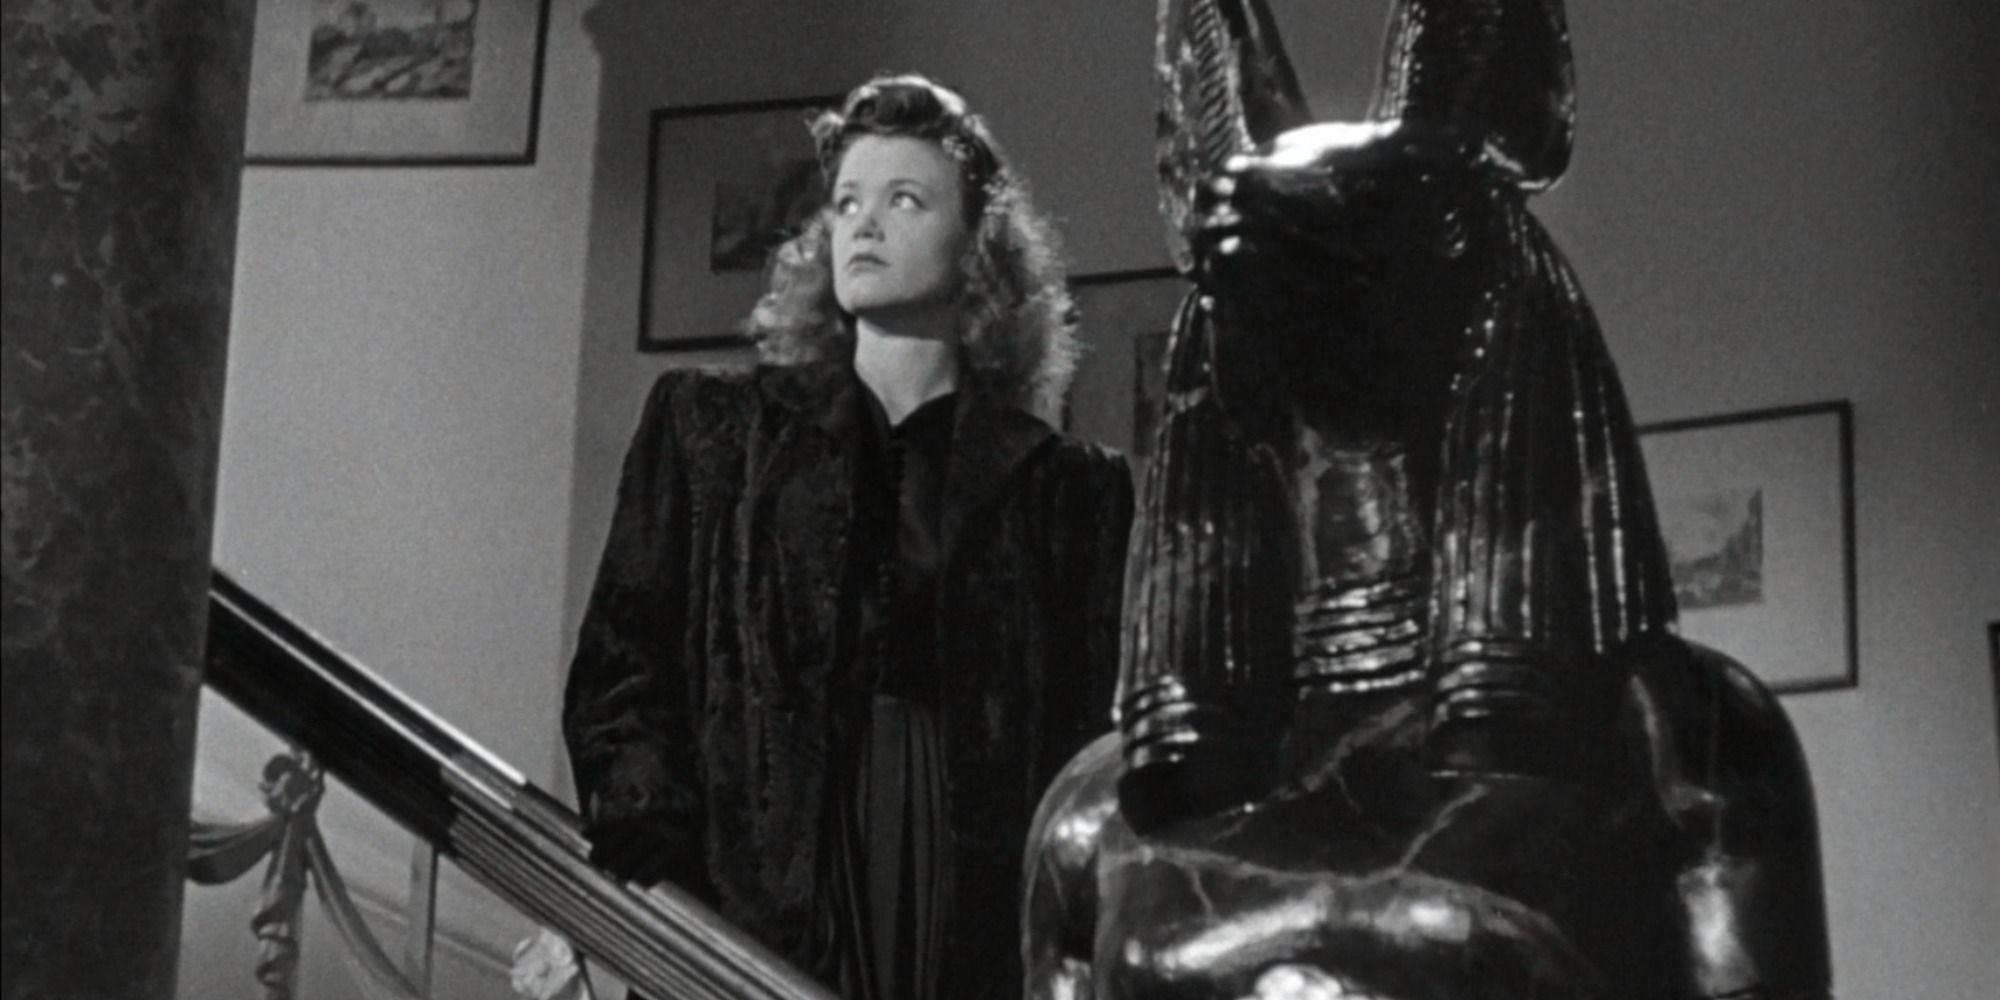 Irene standing next to an anthopromorphic statue of a cat in Cat People (1942)